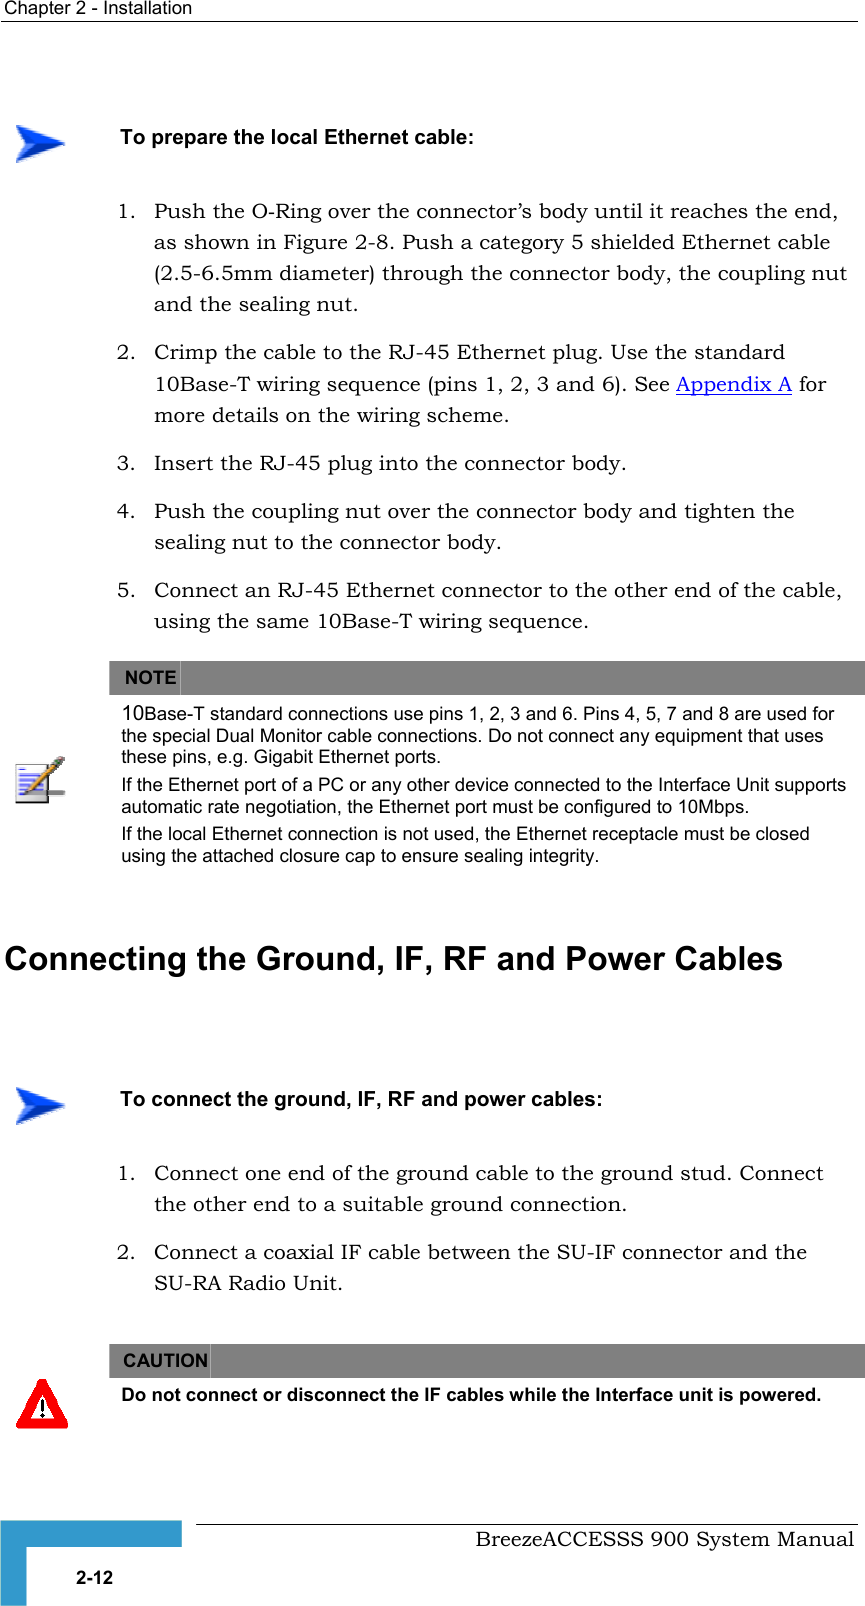 Chapter 2 - Installation     1. Push the O-Ring over the connector’s body until it reaches the end,  2.  Crimp the cable to the RJ-45 Ethernet plug. Use the standard as shown in Figure 2-8. Push a category 5 shielded Ethernet cable (2.5-6.5mm di hrough the connector body, the coupling nutand the sealing nut. ameter) t10Base-T wiring sequence (pins 1, 2, 3 and 6). See Appendix A fomore details on the wiring scheme. r 3.  Insert the RJ-45 plug into the connector body. 4.  Push the coupling nut over the connector body and tighten the 5.  Connect an RJ-45 Ethernet connector to the other end of the cable,   sealing nut to the connector body. using the same 10Base-T wiring sequence. NOTE  10Base-T standard connections use pins 1, 2, 3 and 6. Pins 4, 5, 7 and 8 are used for the special Dual Monitor cable connections. Do not connect any equipment that uses these pins, e.g. Gigabit Ethernet ports. If the Ethernet port of a PC or any other device connected to the Interface Unit supports automatic rate negotiation, the Ethernet port must be configured to 10Mbps. If the local Ethernet connection is not used, the Ethernet receptacle must be closed using the attached closure cap to ensure sealing integrity.   Connecting the Ground, IF, RF and Power Cables   1.  Connect one end of the ground cable to the ground stud. Connect 2.  Connect a coaxial IF cable between the SU-IF connector and the   To prepare the local Ethernet cable:    To connect the ground, IF, RF and power cables: the other end to a suitable ground connection. SU-RA Radio Unit. CAUTION    Do not connect or disconnect the IF cables while the Interface unit is powered.    BreezeACCESSS 900 System Manual 2-12 